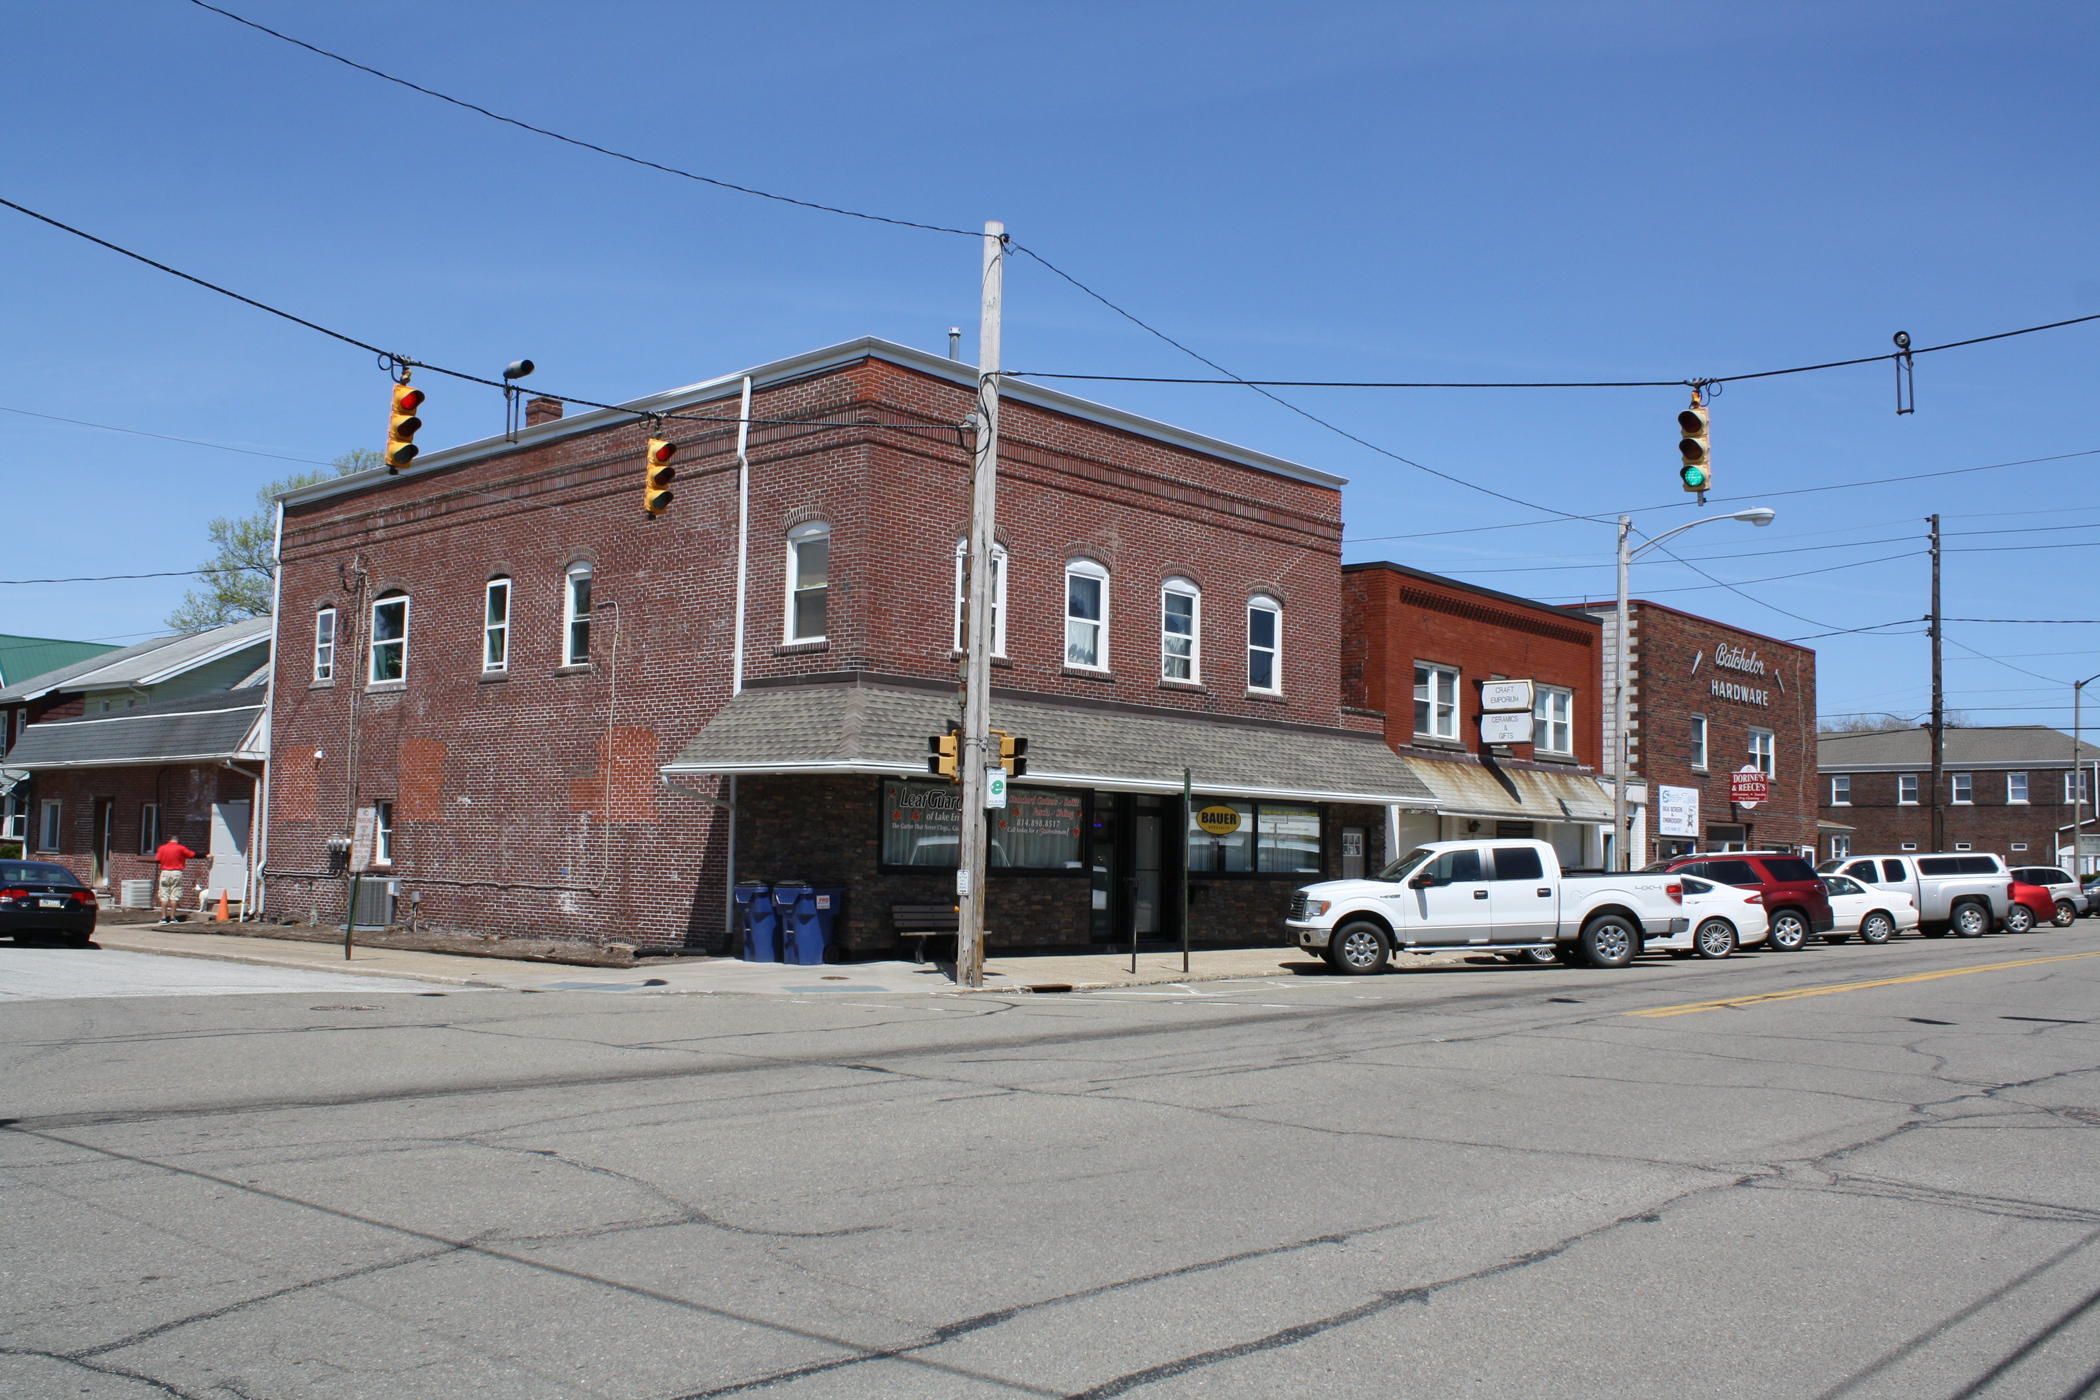 Commercial Buildings located at 4002-4004 Main Street in the Lawrence Park Historic District – Photo by NaylorWellman.